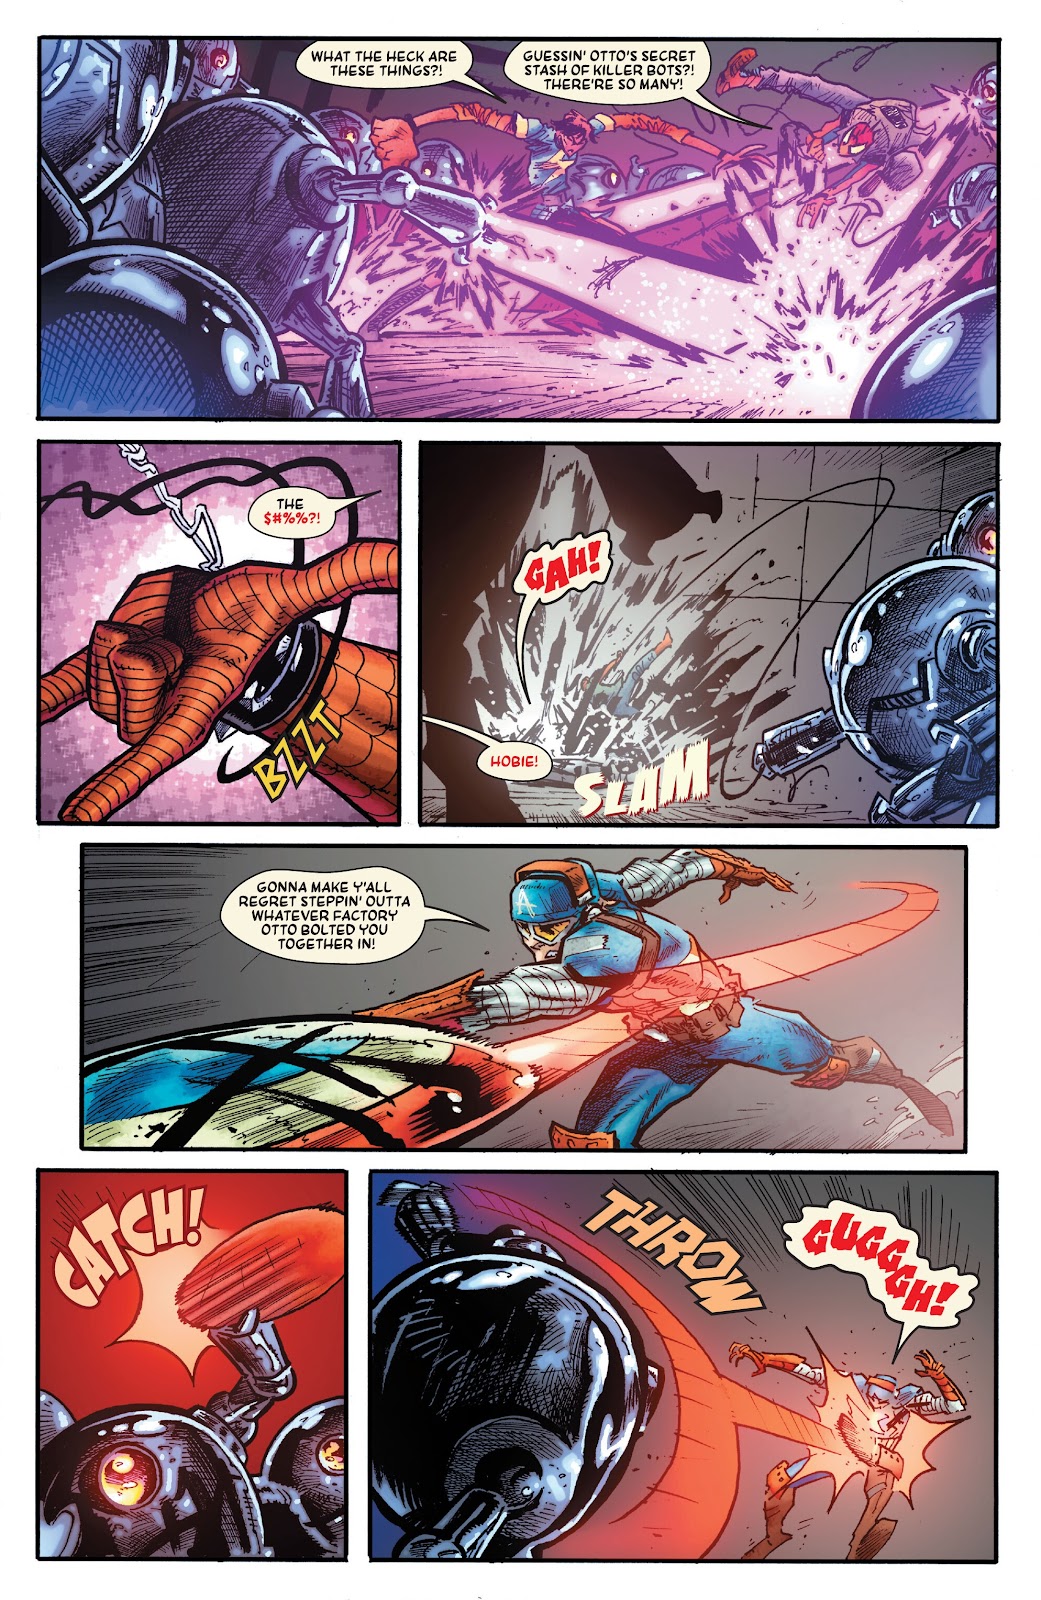 Spider-Punk: Arms Race issue 3 - Page 9